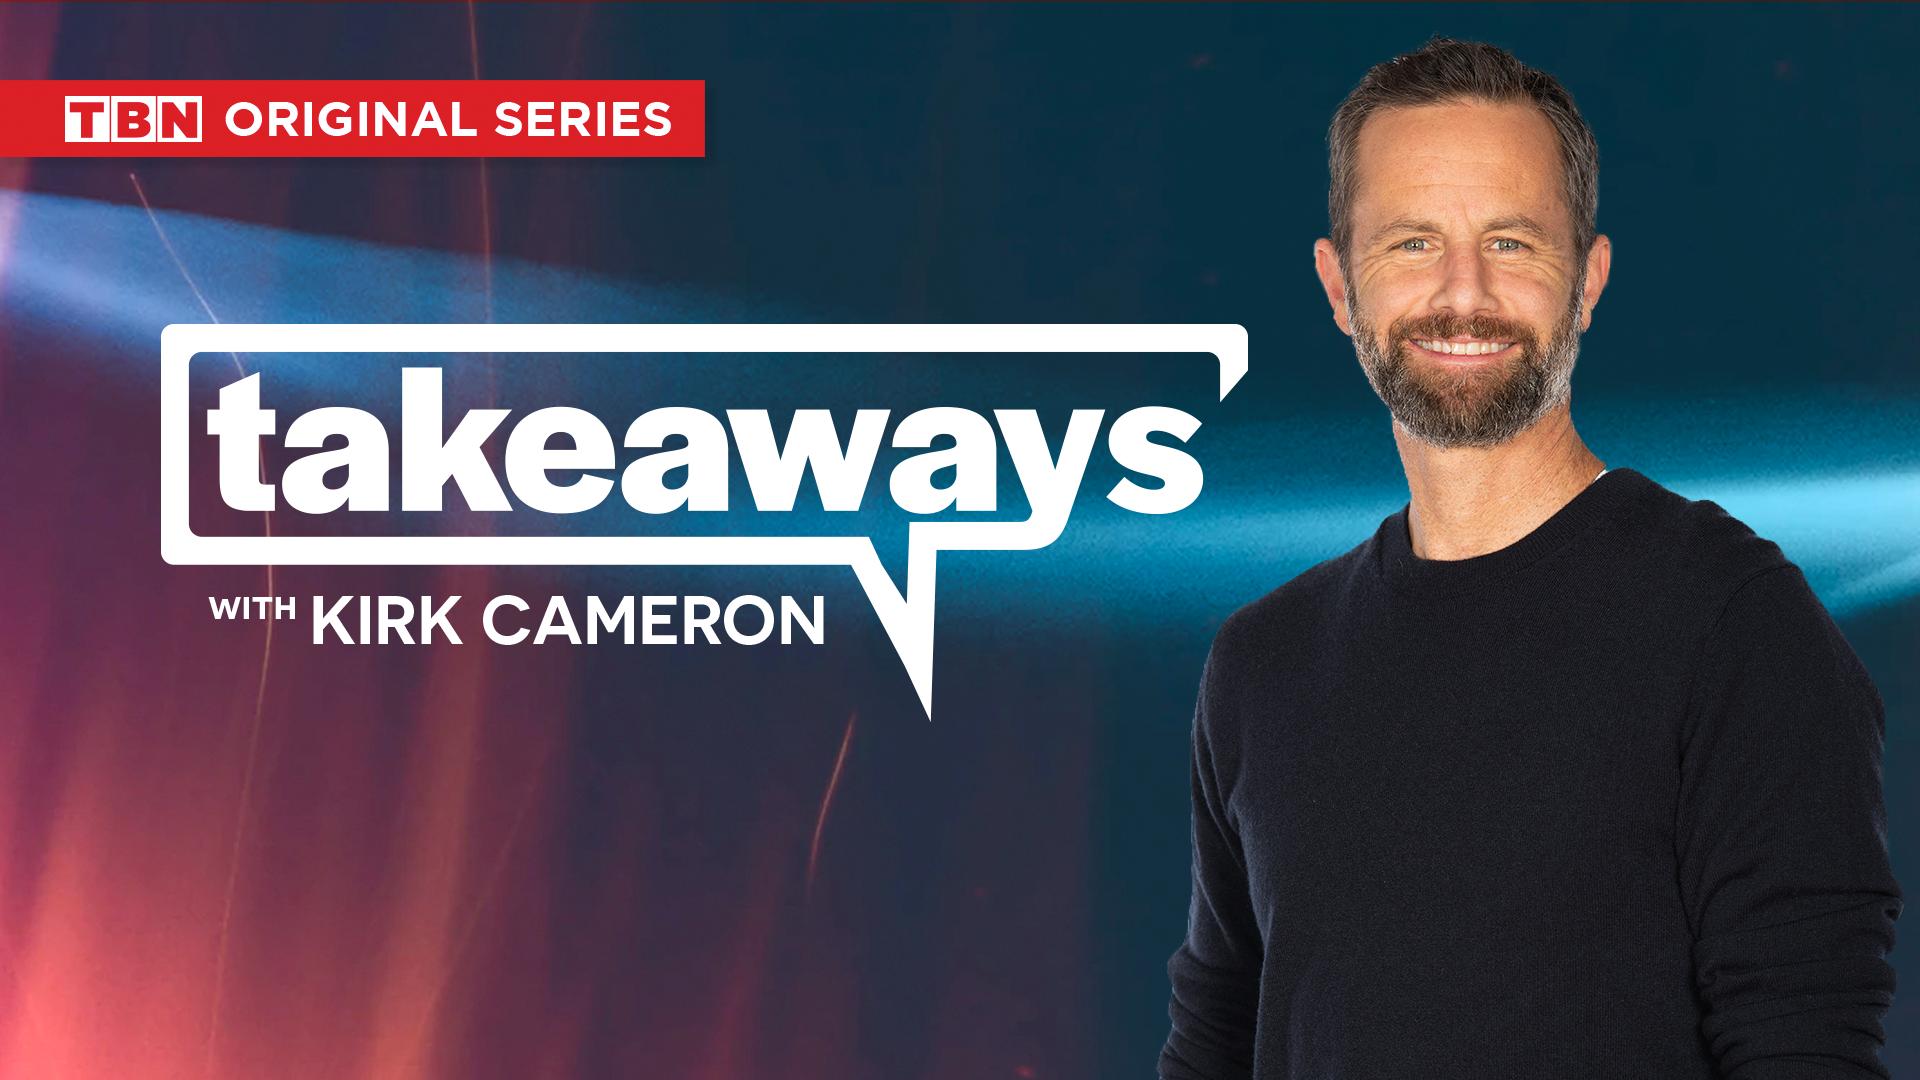 Takeaways with Kirk Cameron on TBN